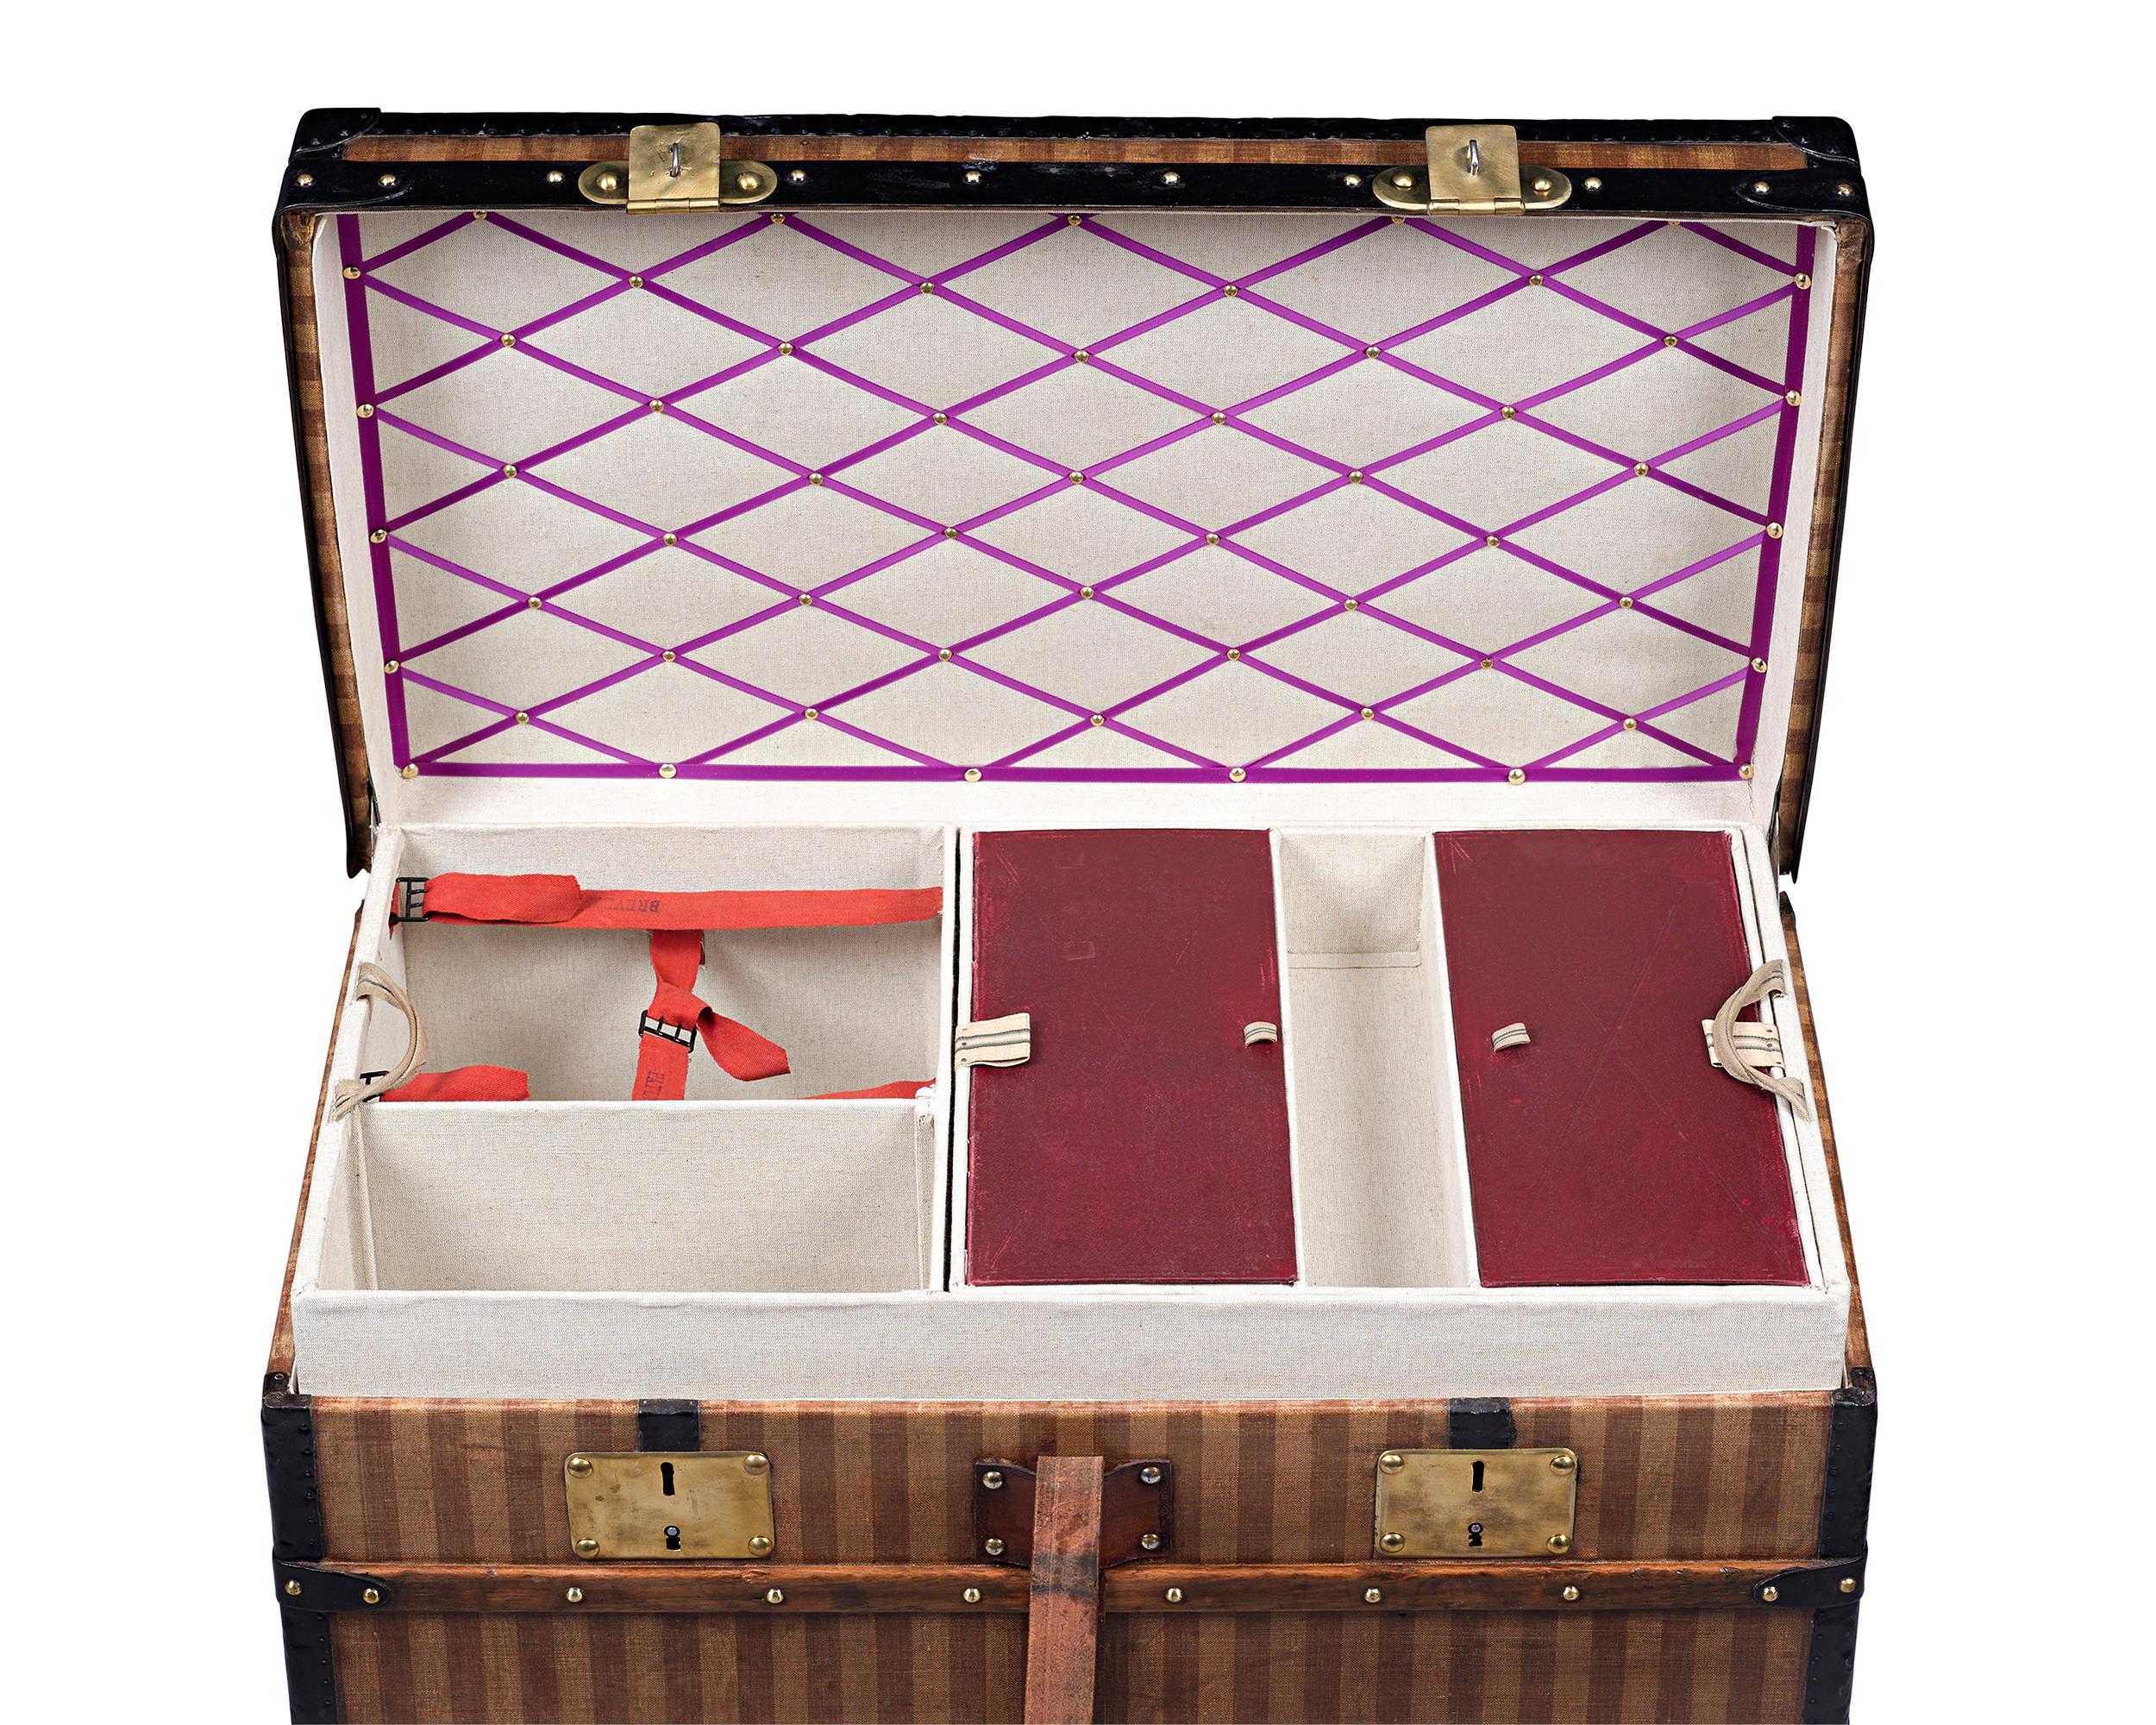 This outstanding and extremely rare Louis Vuitton steamer trunk is a treasure. Crafted in the firm's flat-top style, this trunk boasts the Rayée (